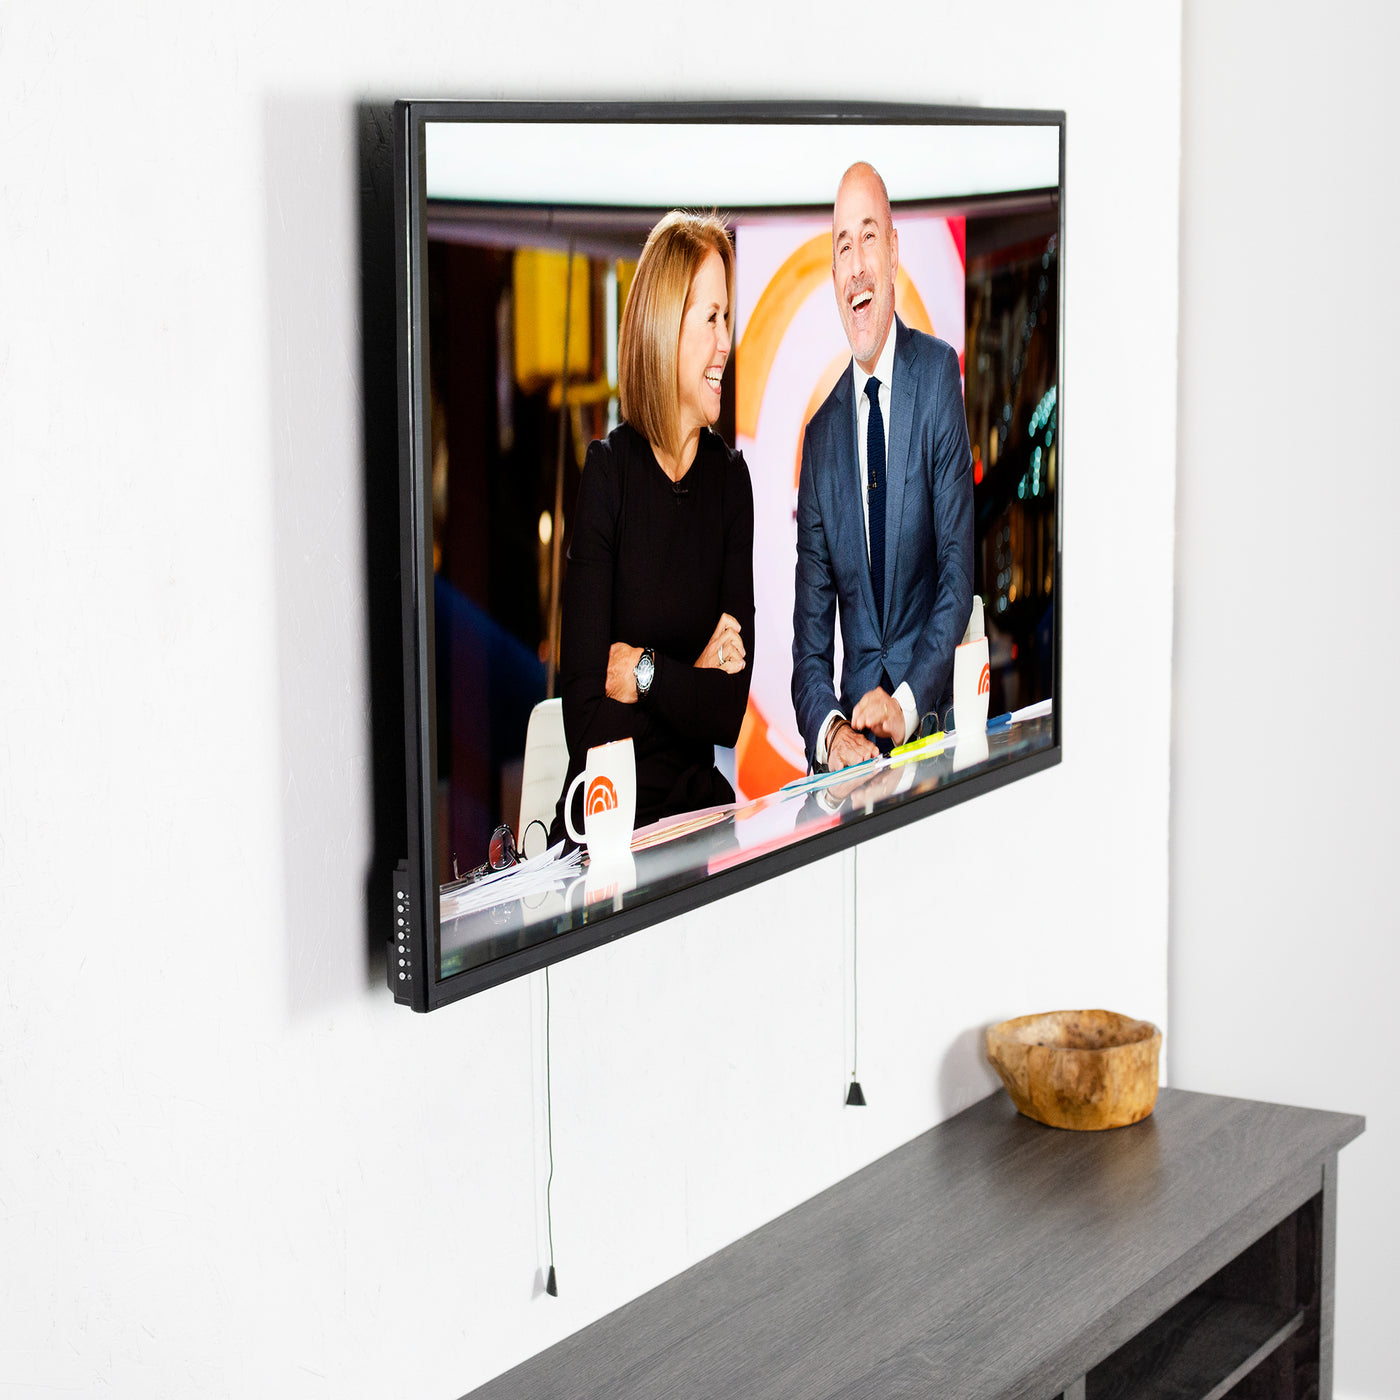 Extra large adjustable TV mount from VIVO above a shelf.